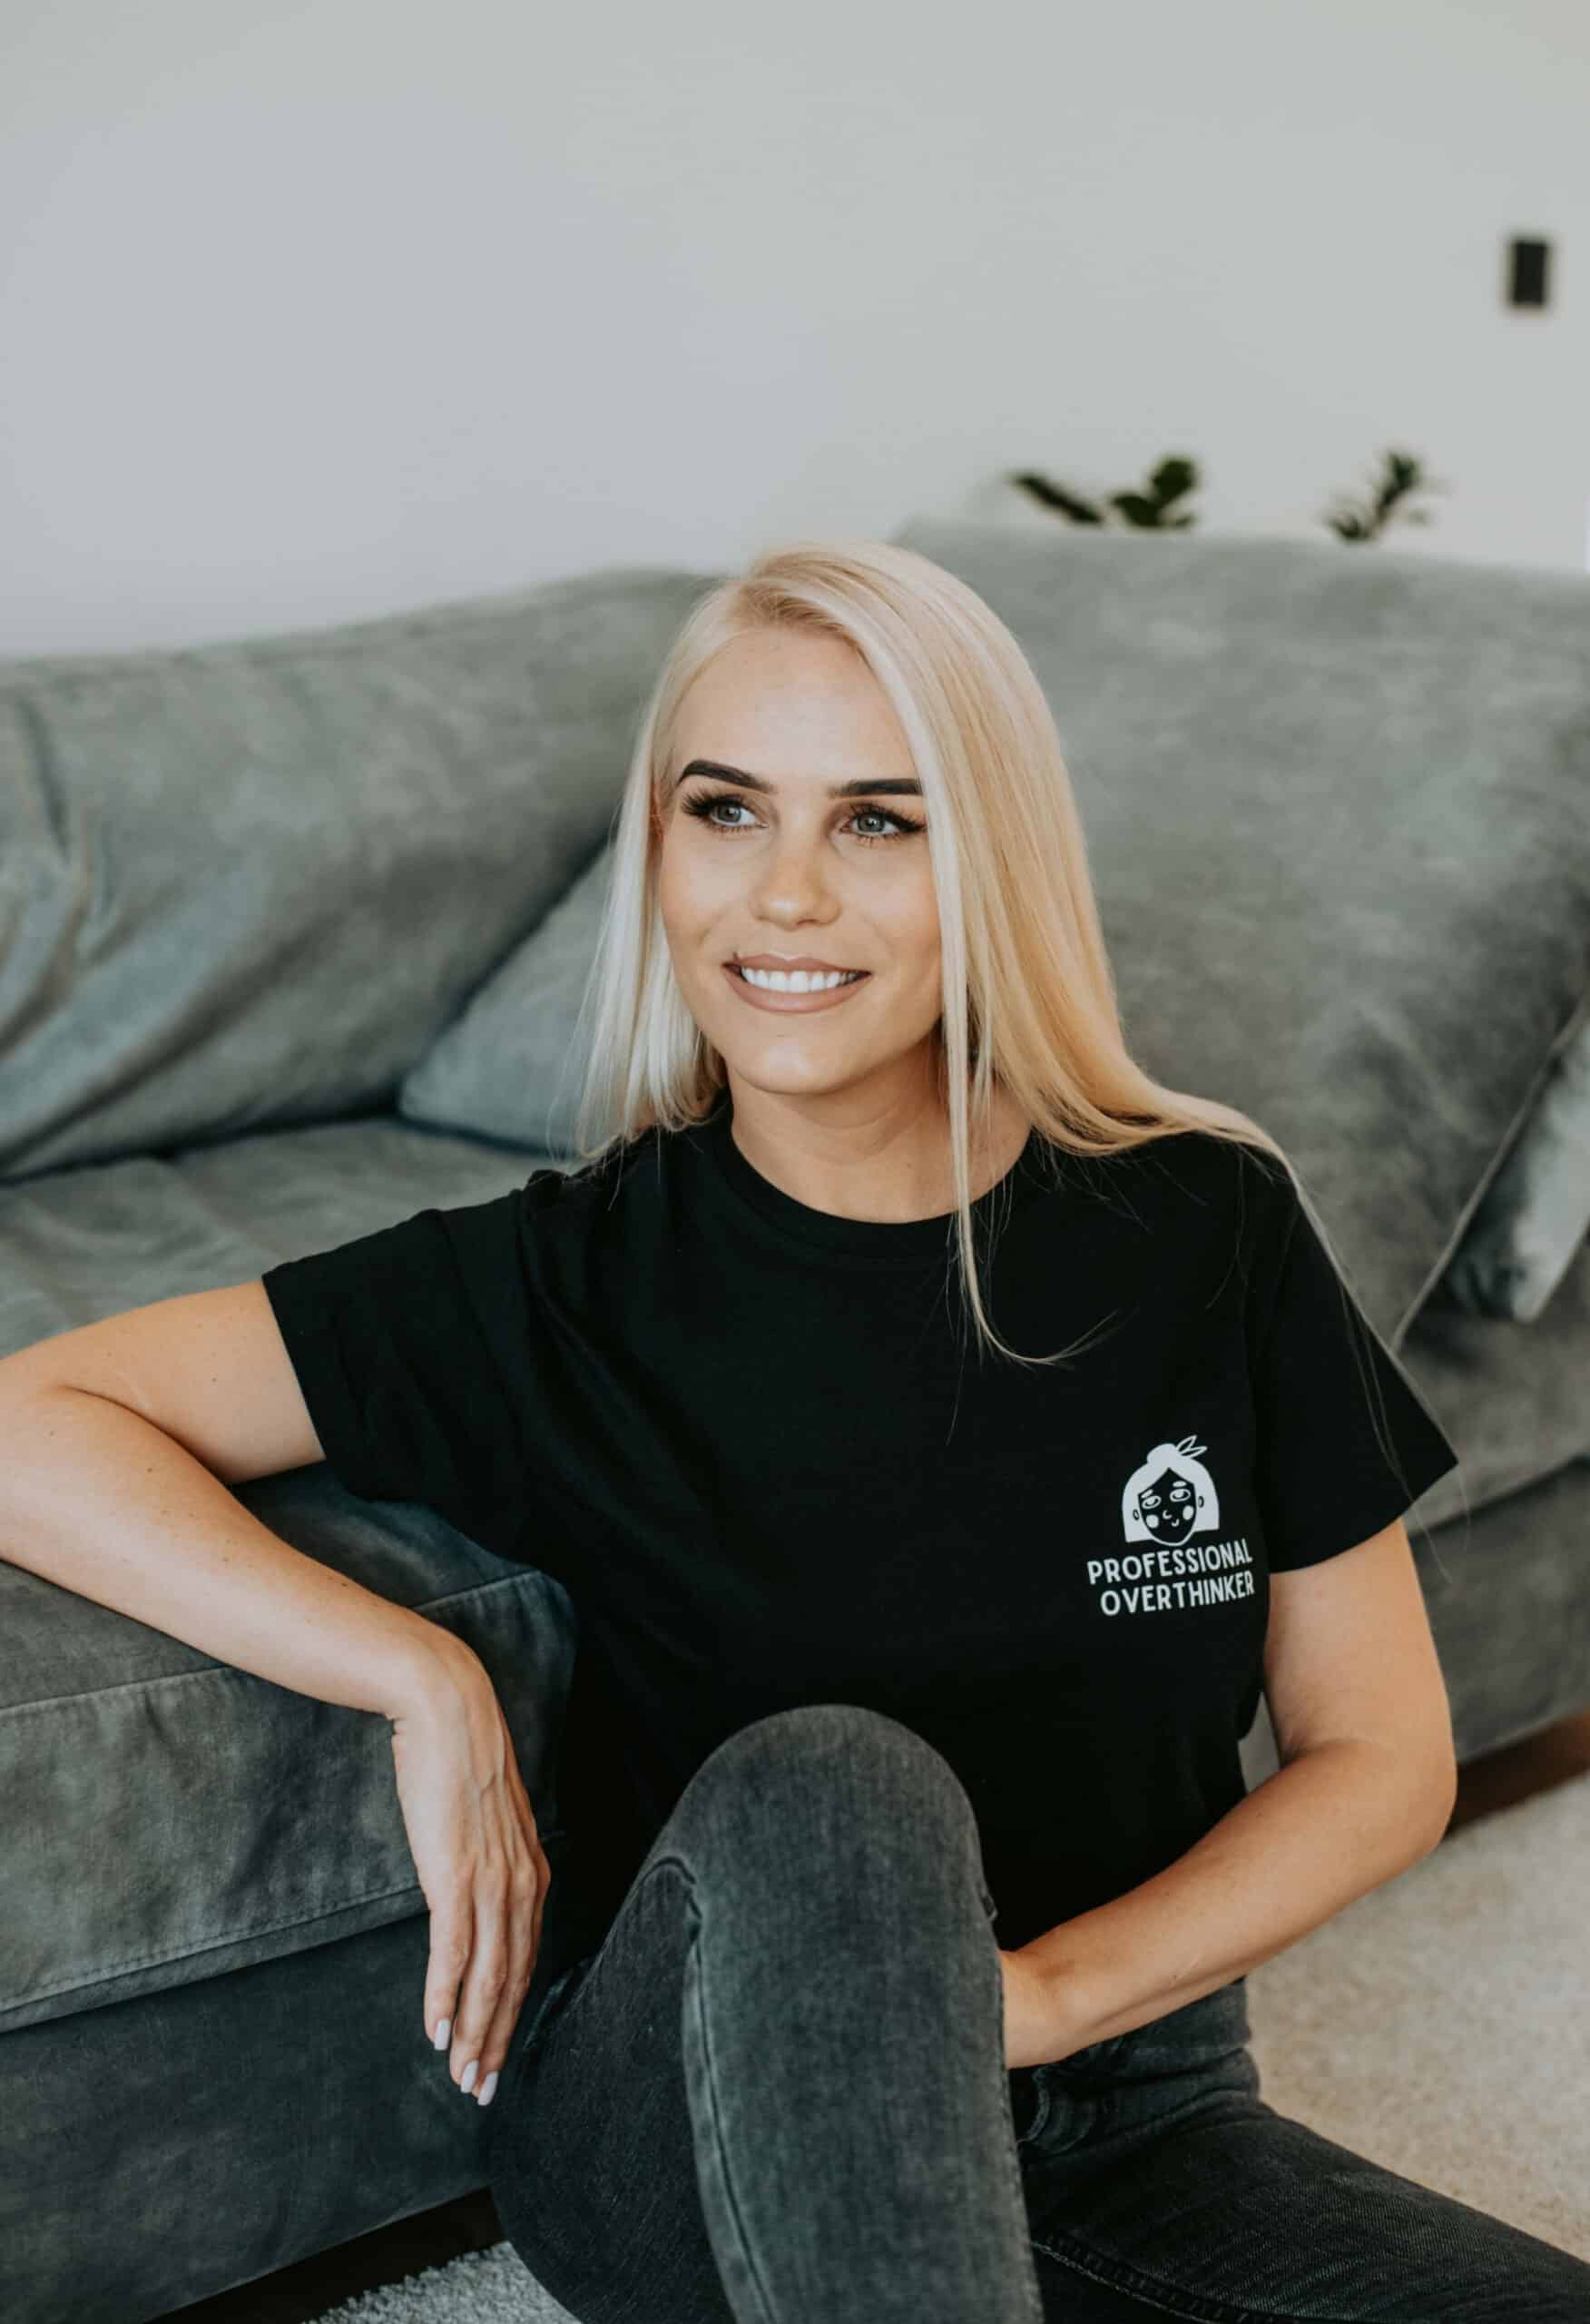 A woman in a black shirt sits on a couch, smiling at the camera. She wears an oversized organic cotton t-shirt with Professional Overthinker printed on it.